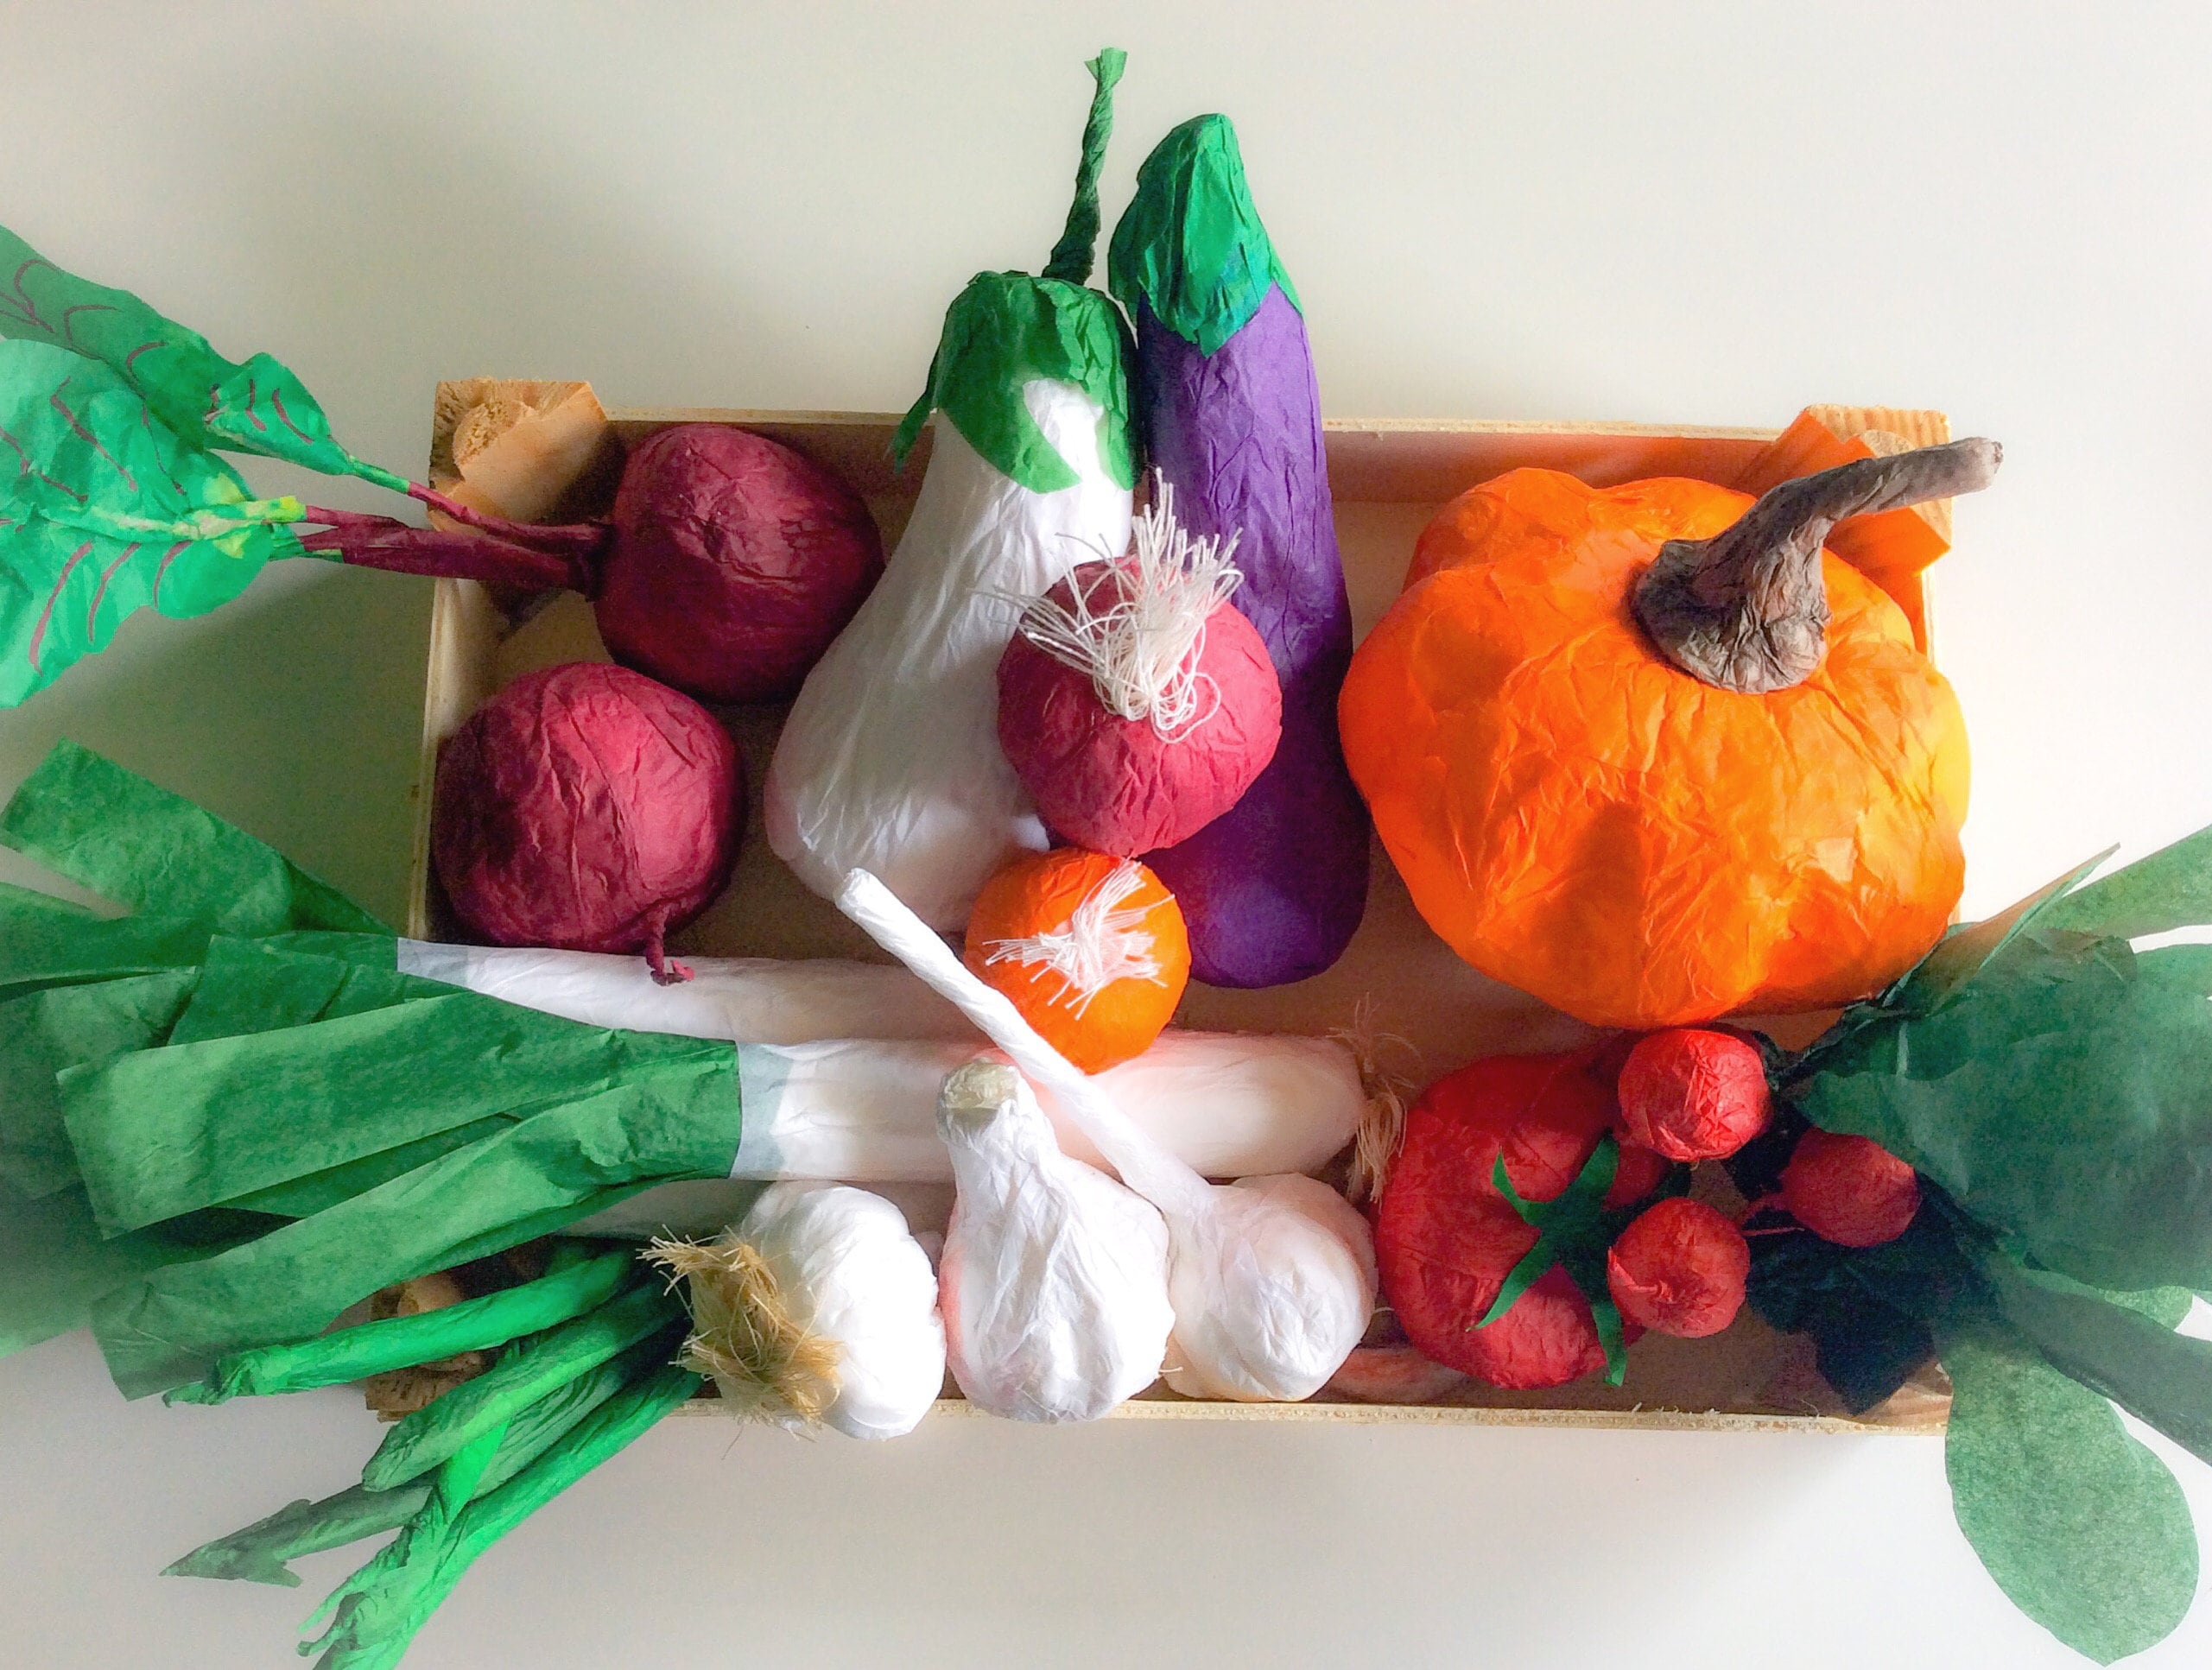 Basket Of Vegetables Hand Made Papers. Nice For The Game & Decor.